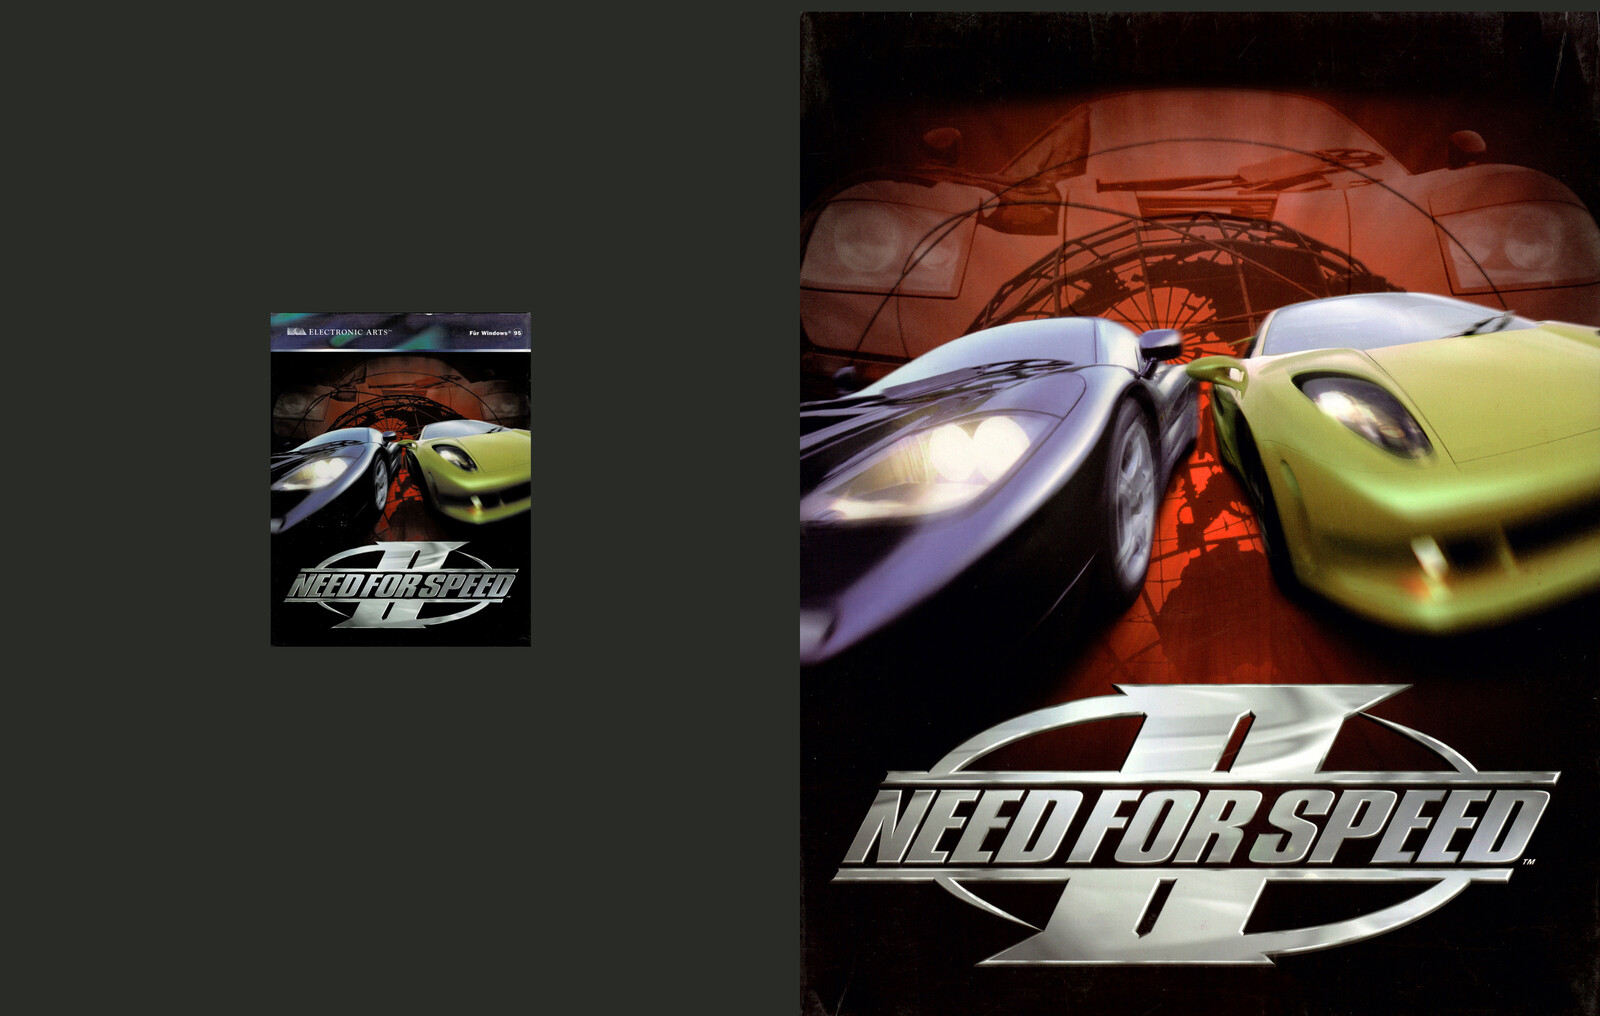 Need for Speed II (Original Scan vs. Poster format)